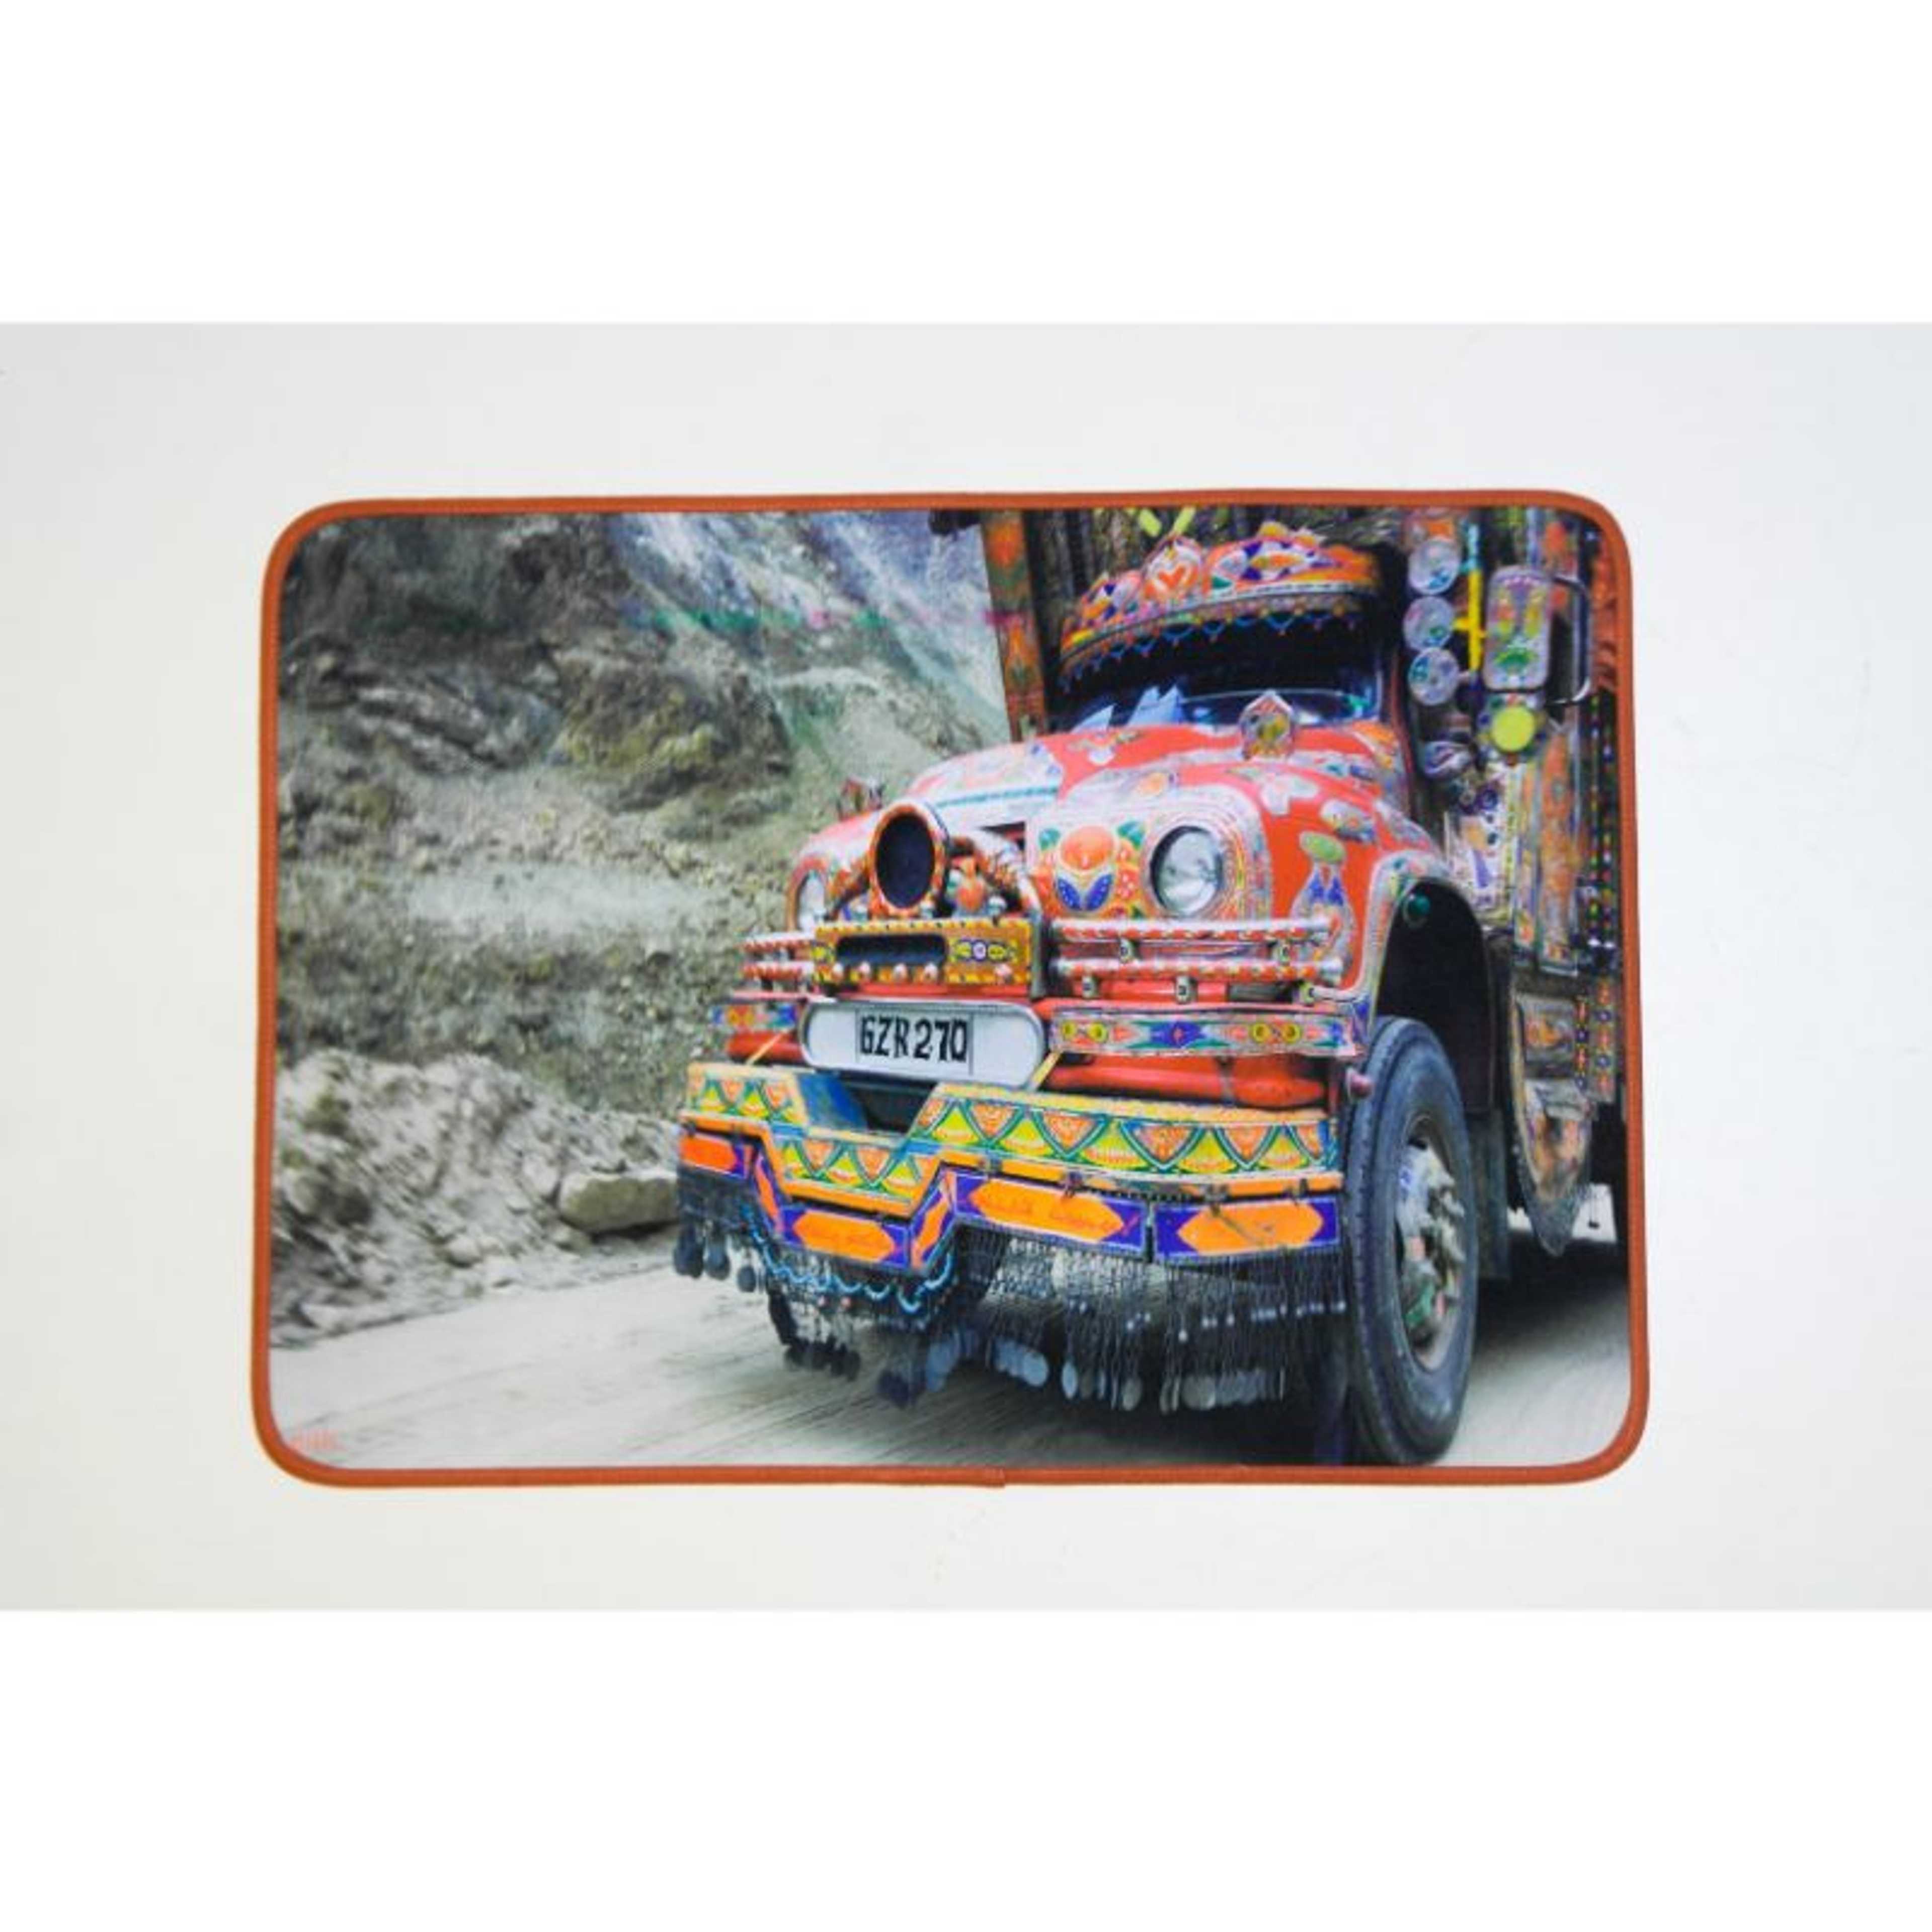 THE GZR 270 RED TRUCK - TABLE MAT